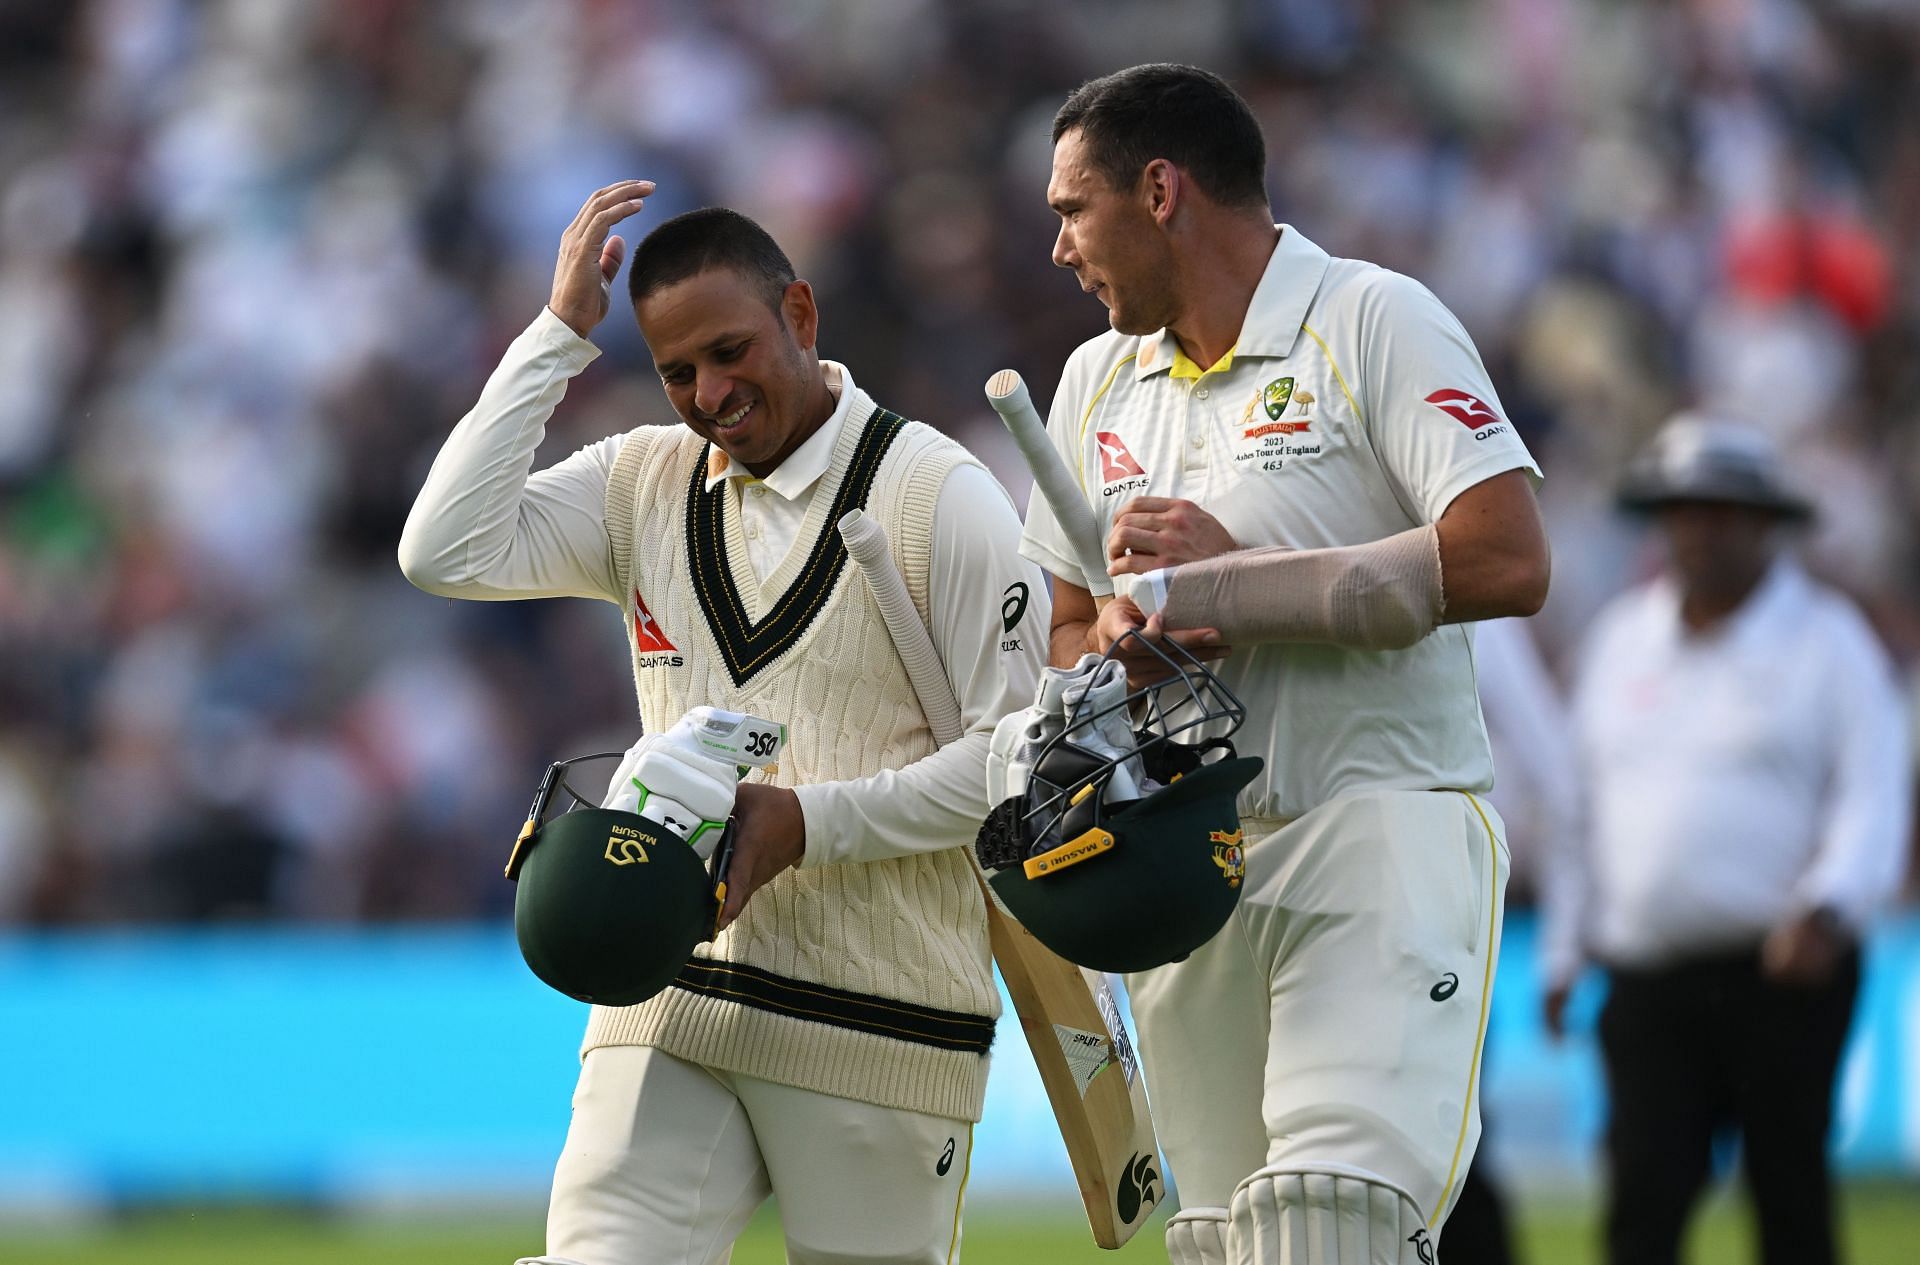 Australia need a further 174 runs with seven wickets in hand.